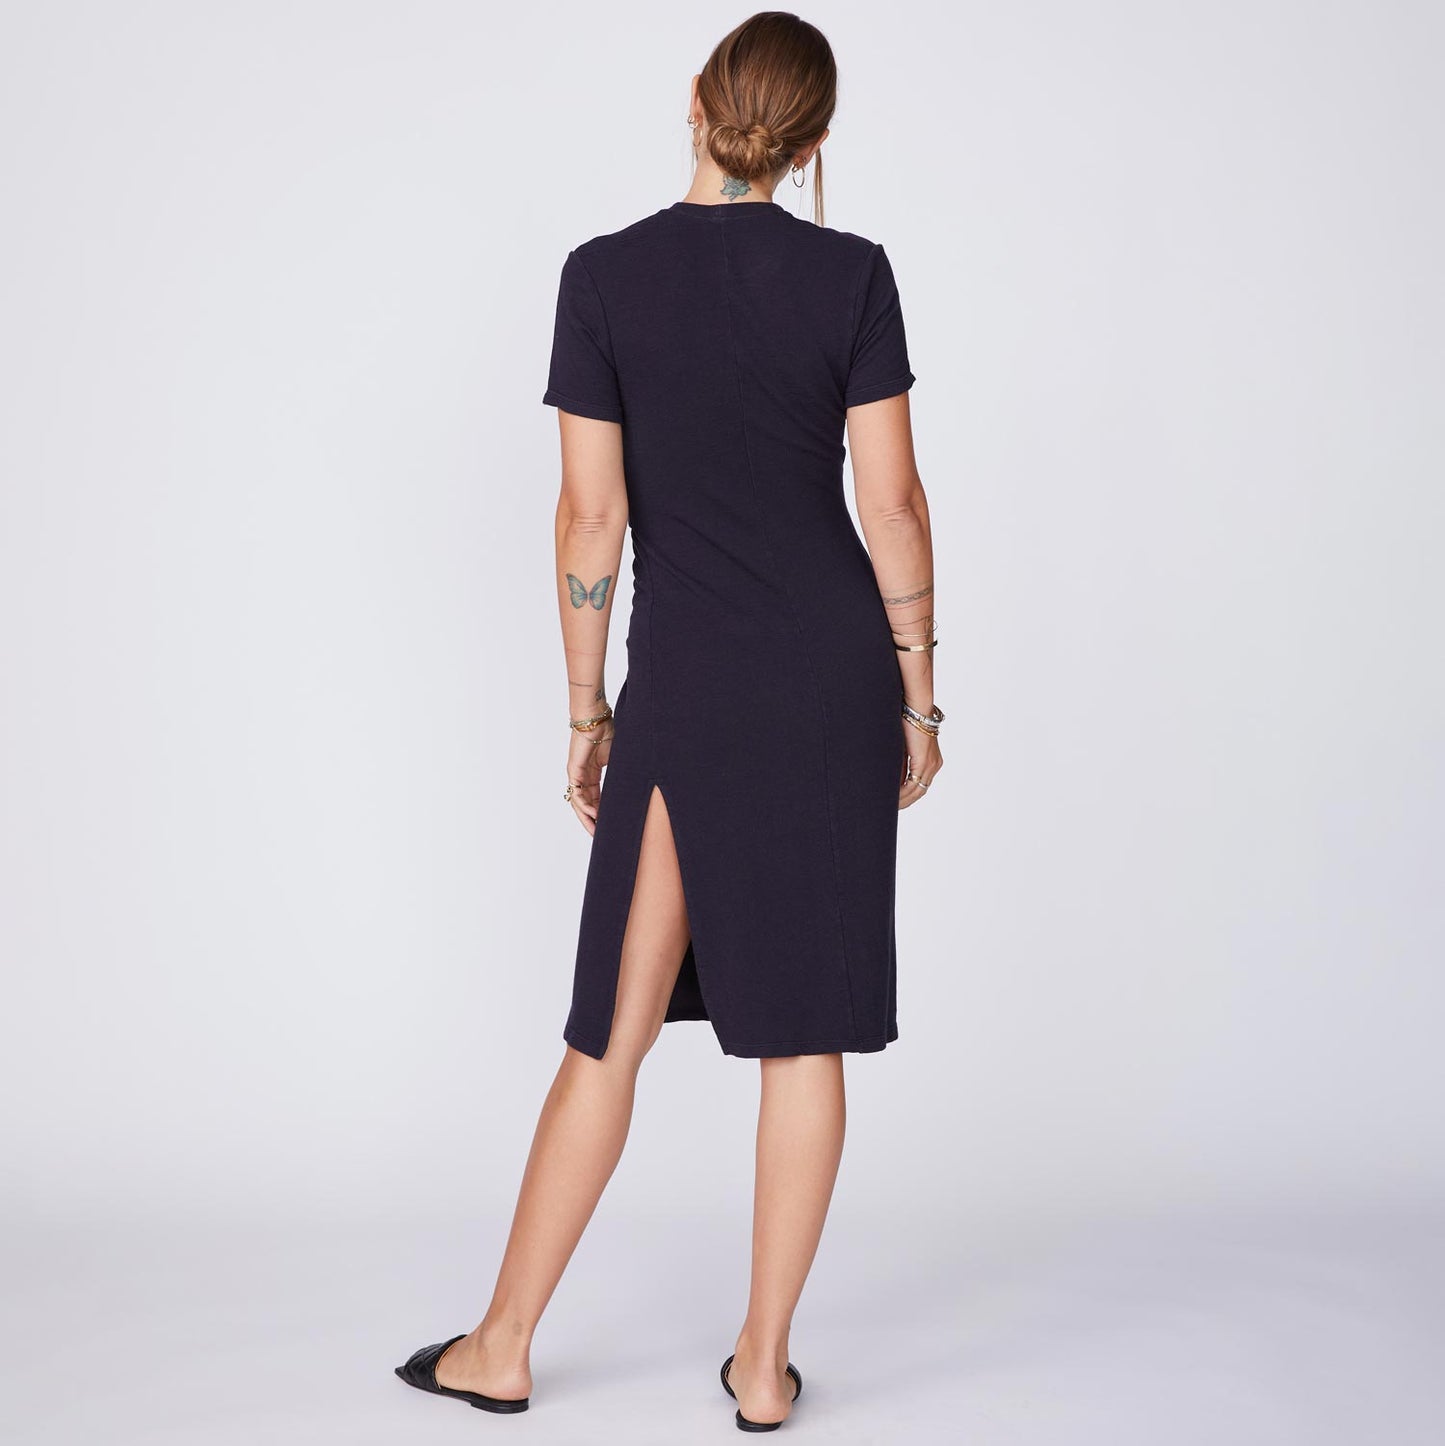 Back View of model wearing the Supersoft Front Twist Dress in Faded Black